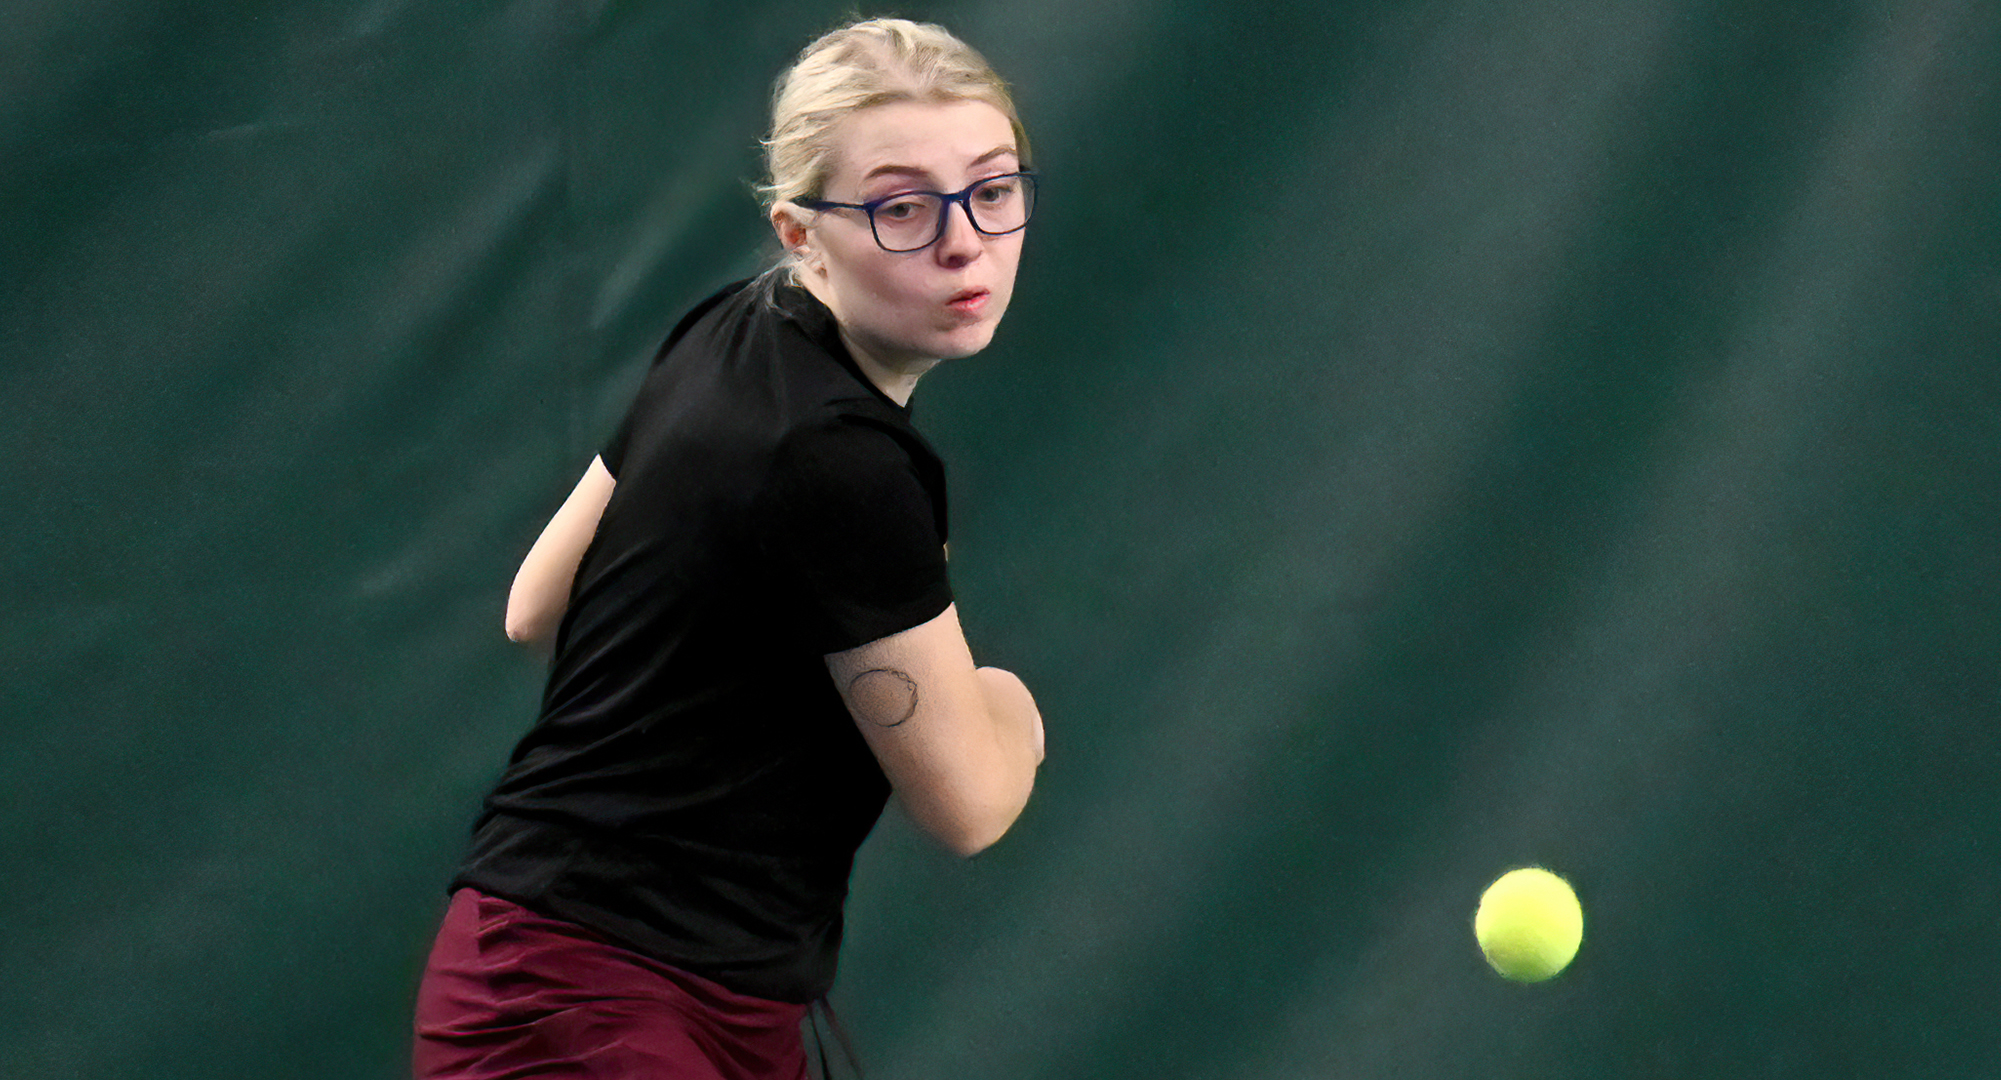 Junior Lizzie Allan eyes the ball as she gets ready to hit a backhand during her match at No.5 singles in the Cobbers meet with MSU Moorhead.